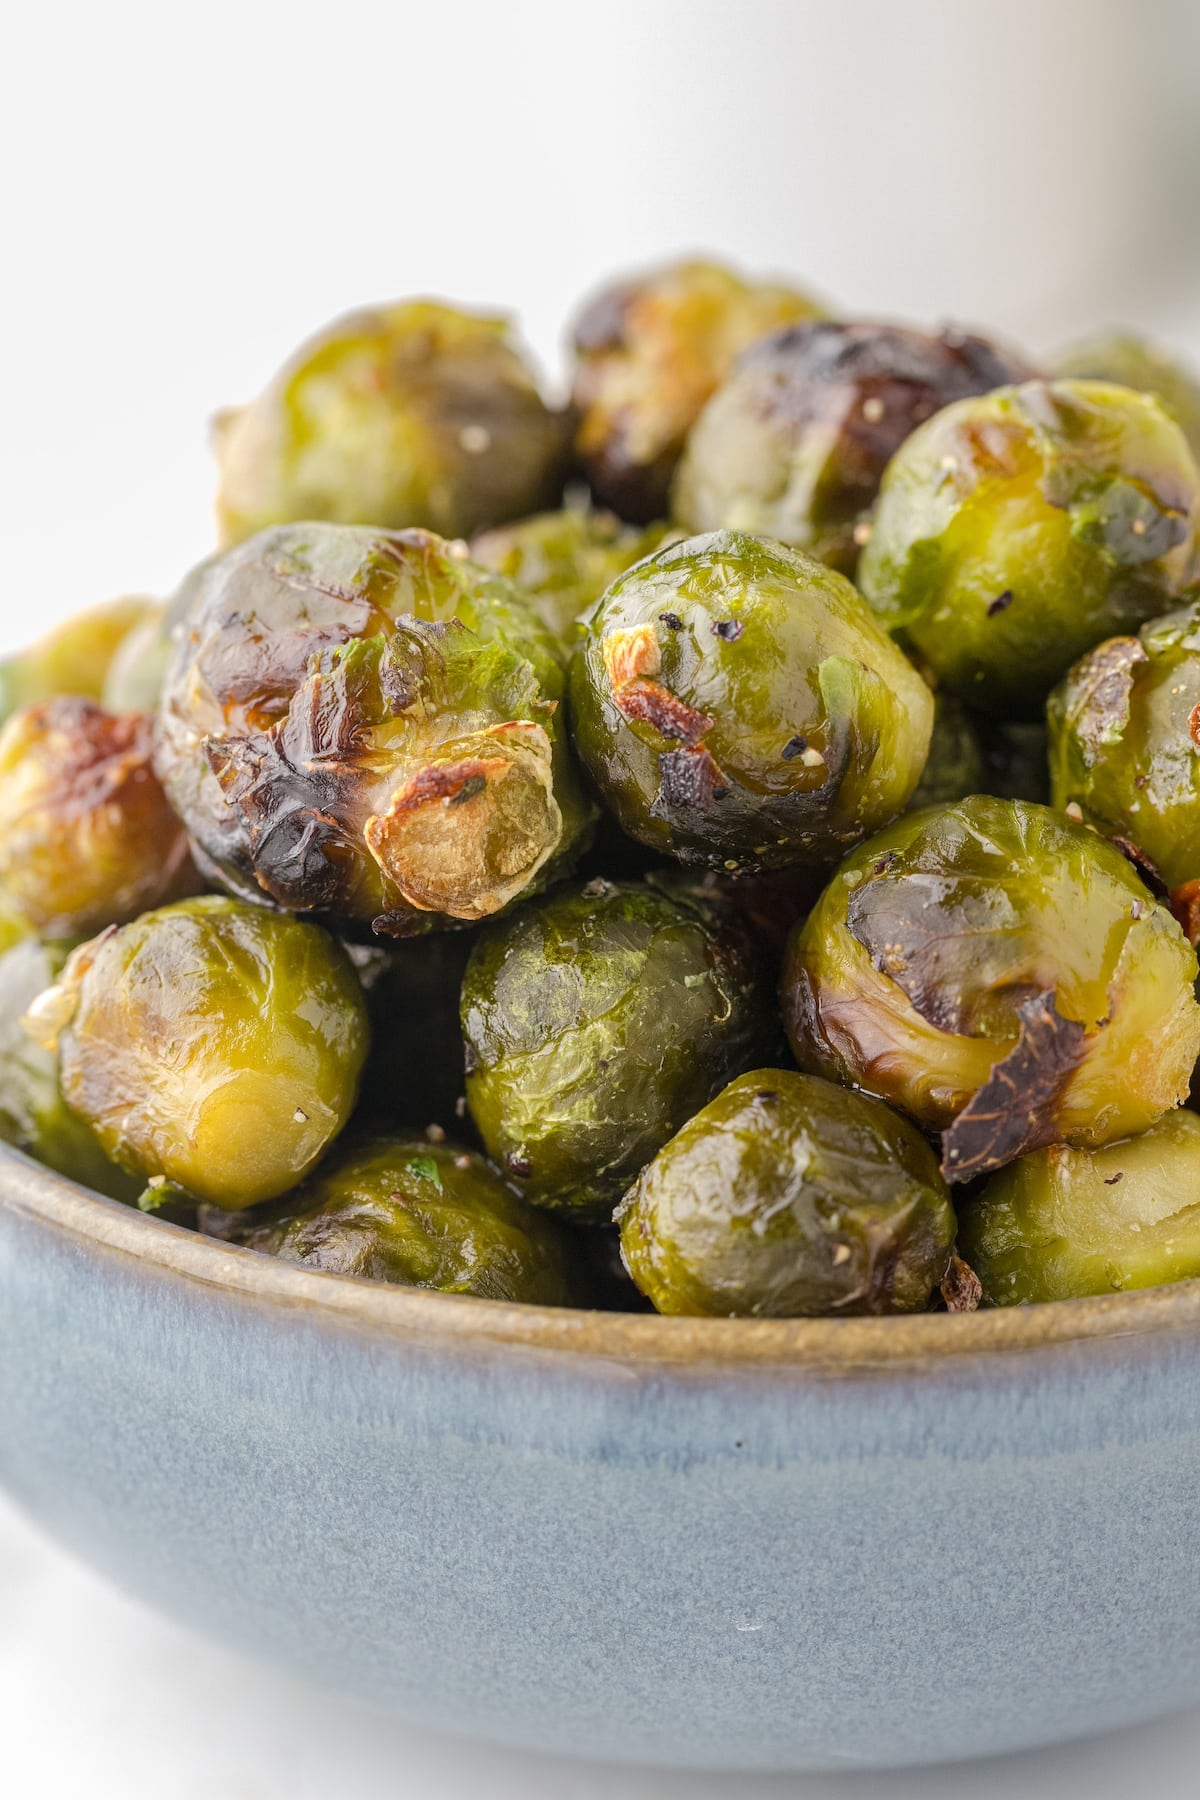 a close up of whole roasted brussels sprouts in a blue bowl